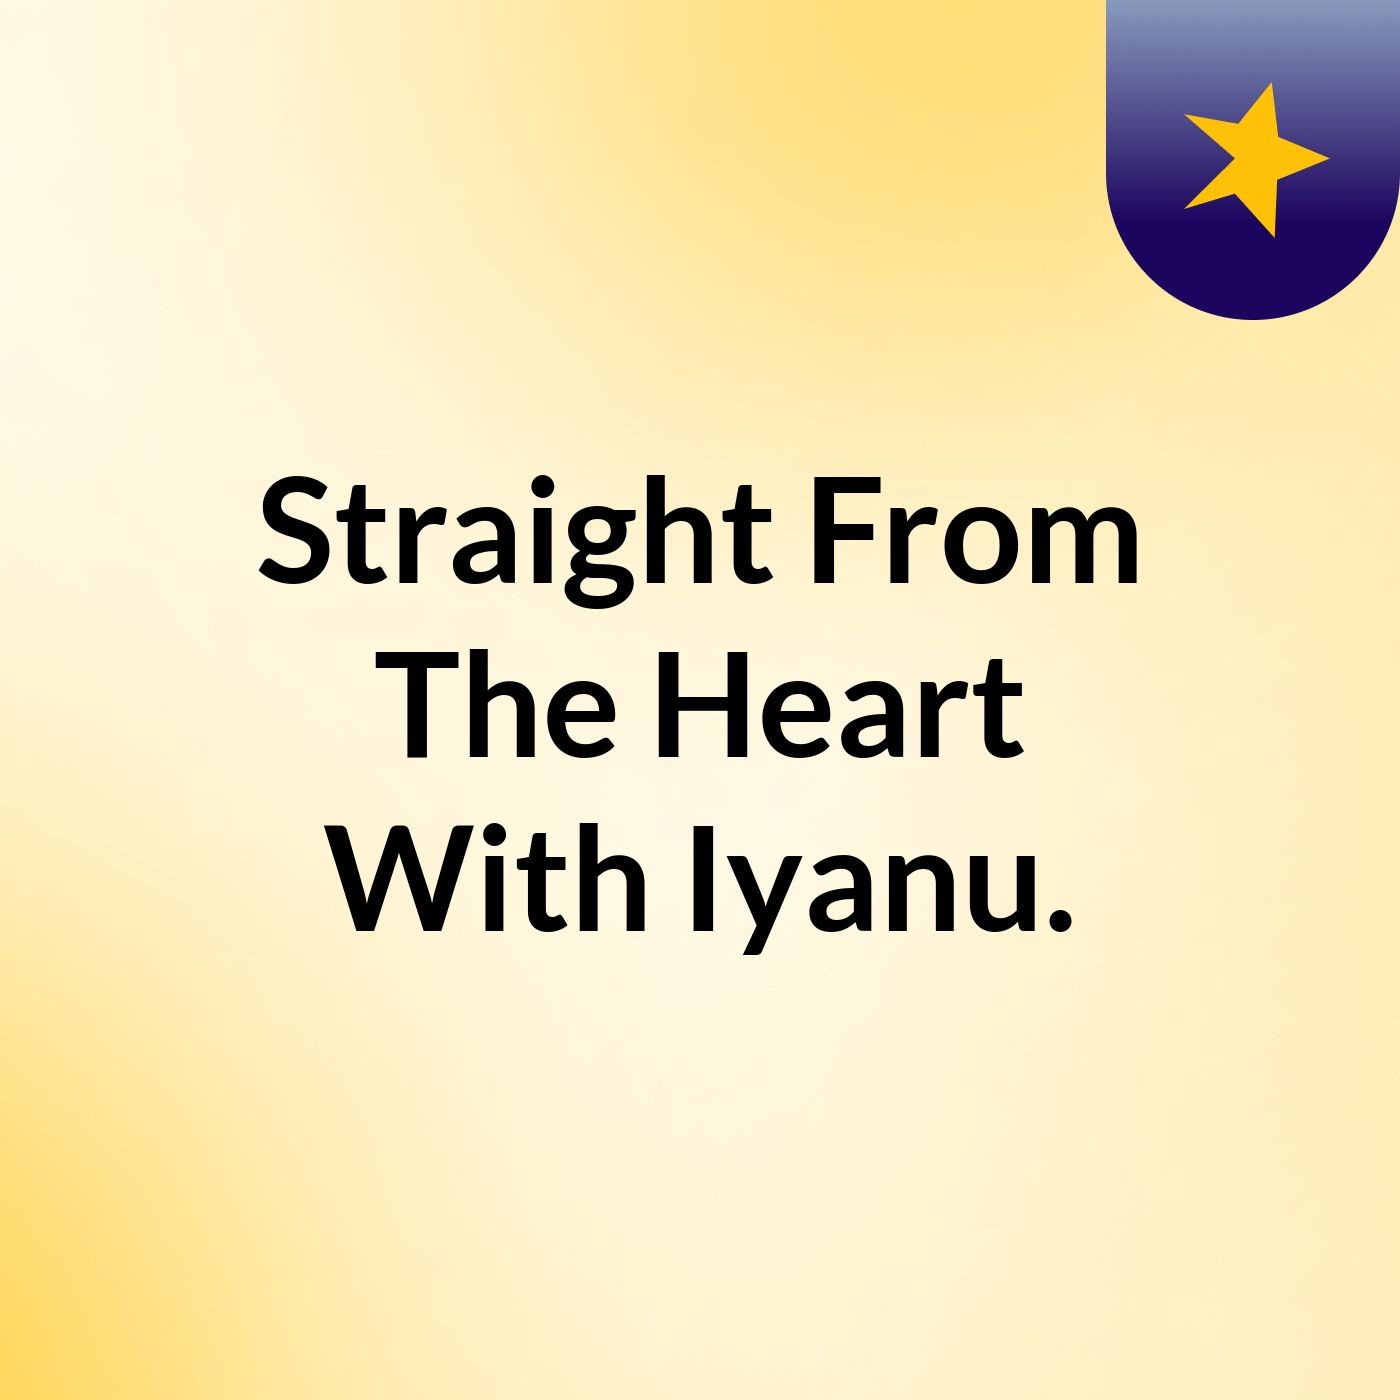 Straight From The Heart With Iyanu.